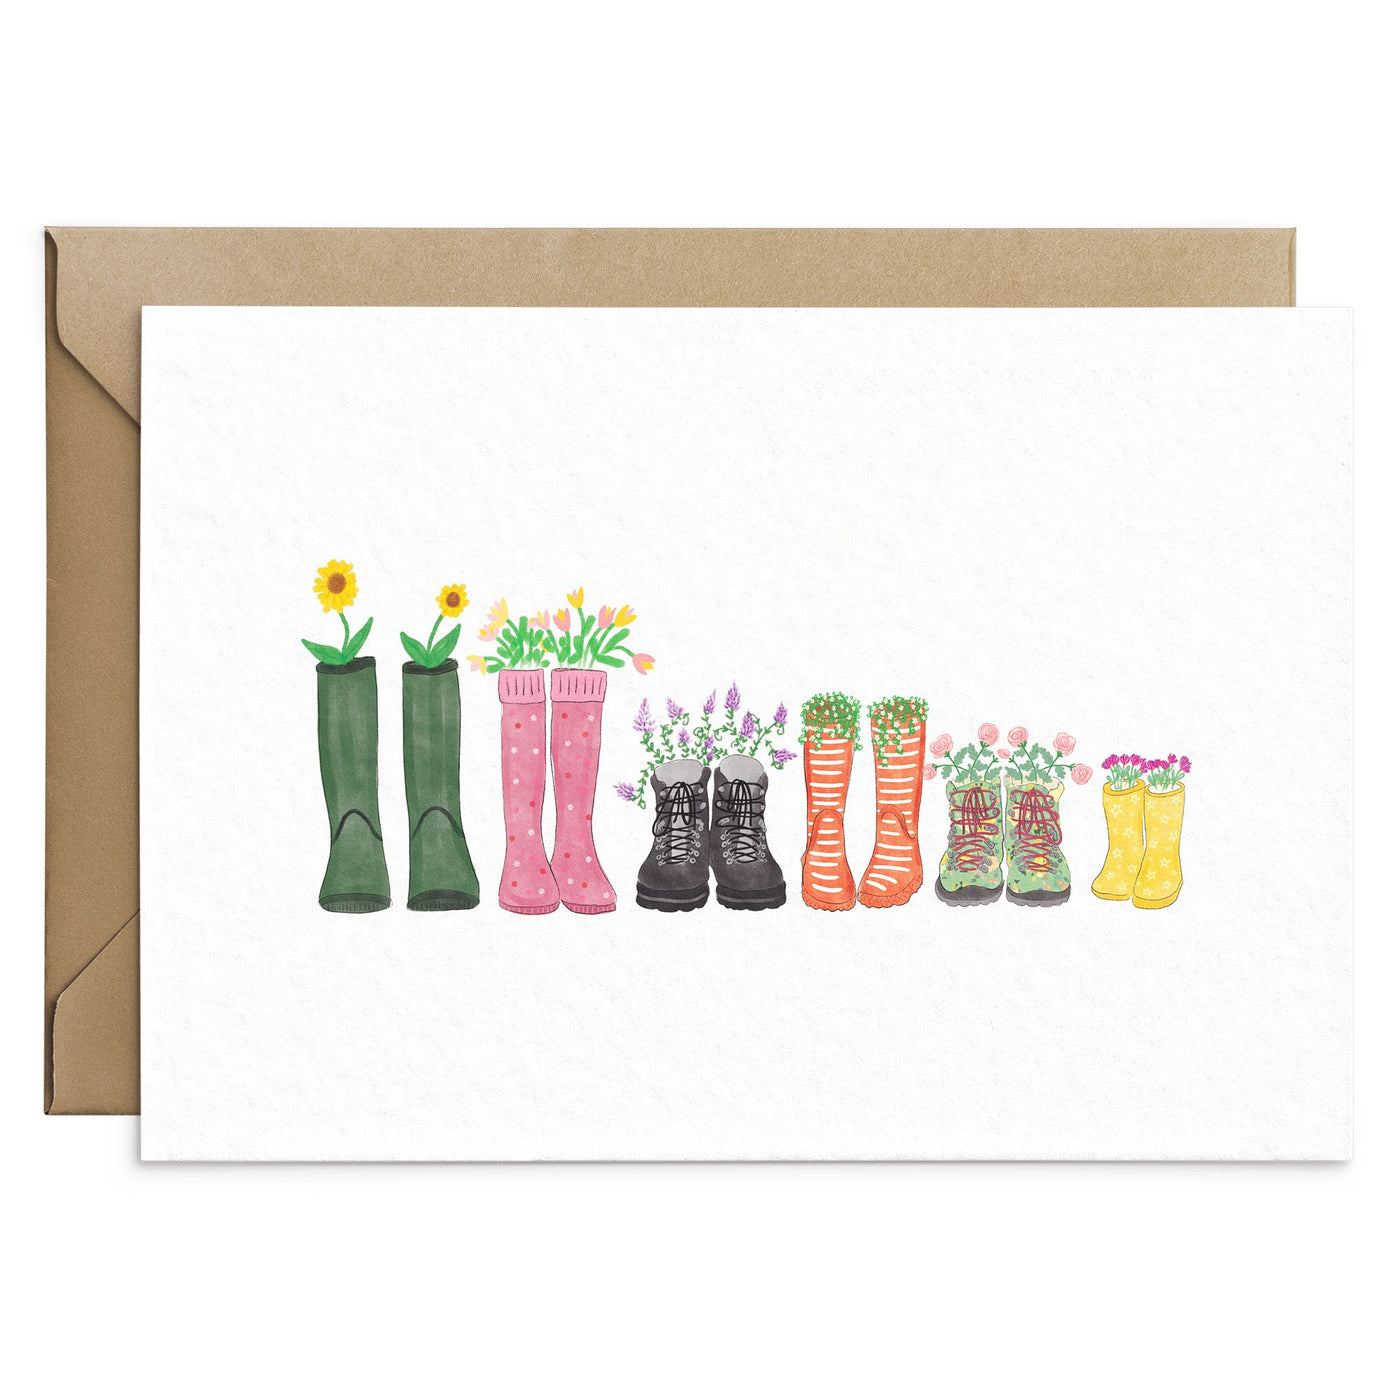 Floral Welly Boots Family Card - Poppins & Co.